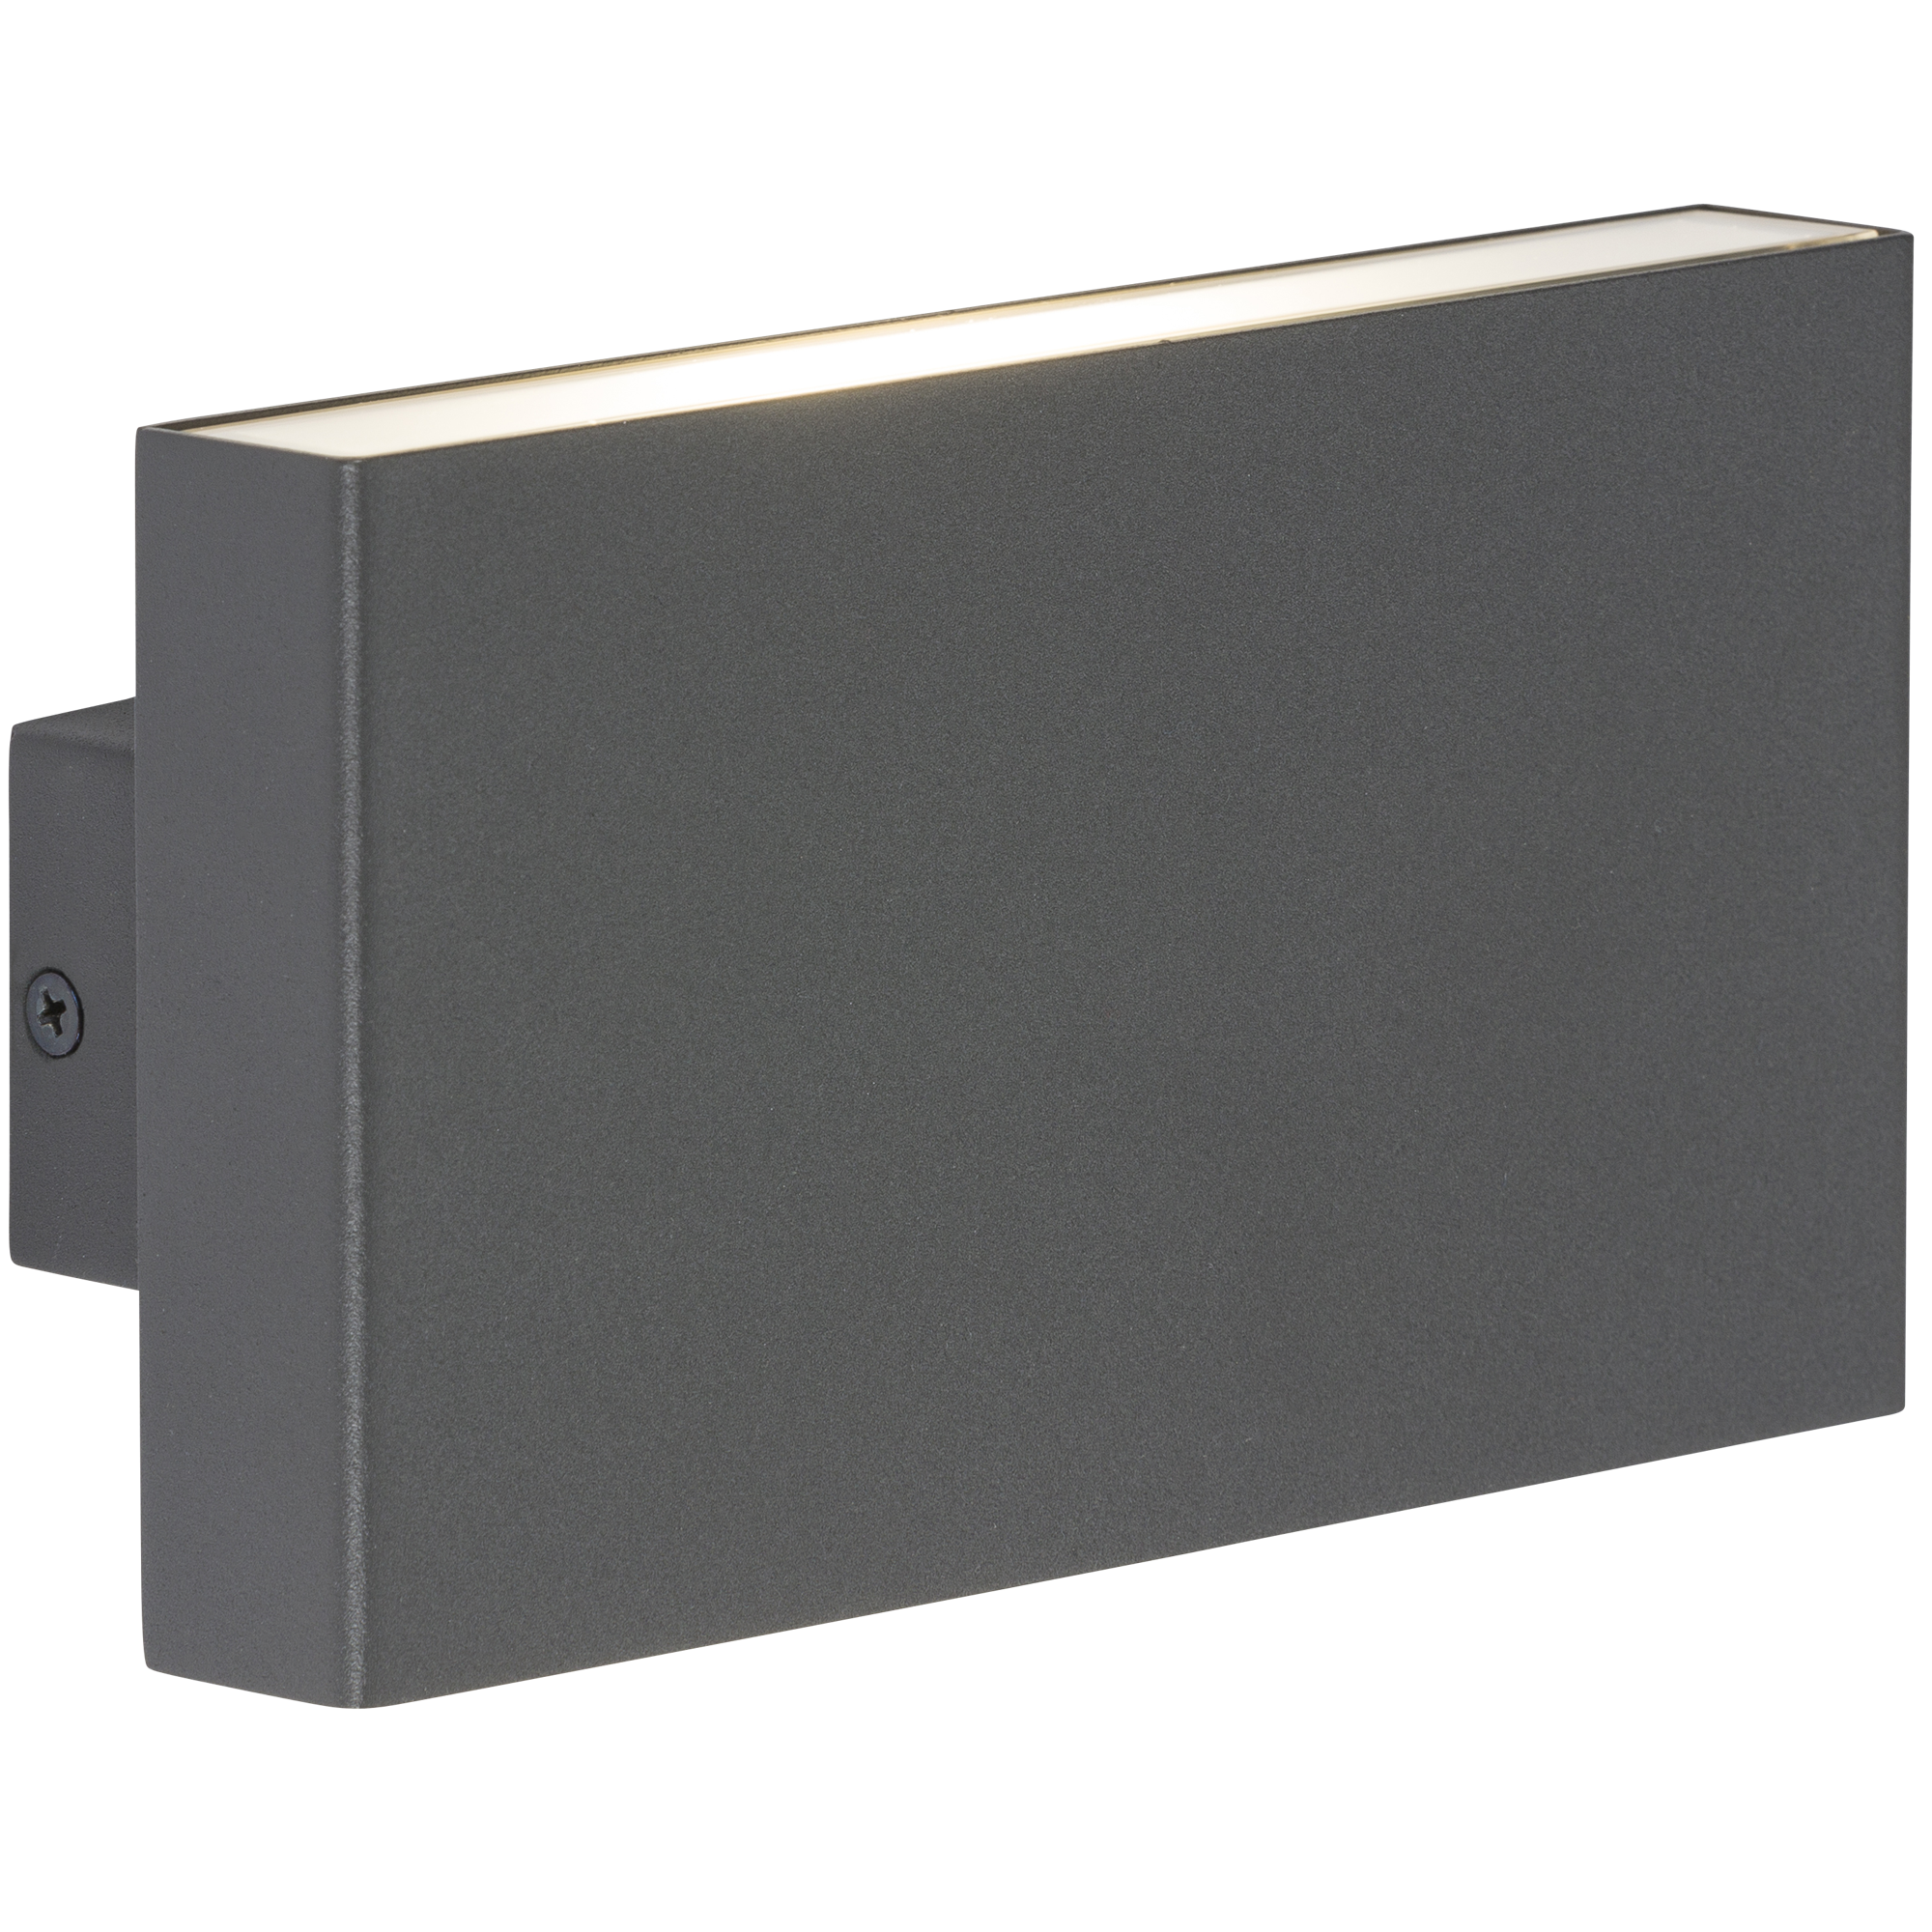 230V IP54 2x8W Up/Down LED Wall Light - Anthracite - WSM16A 